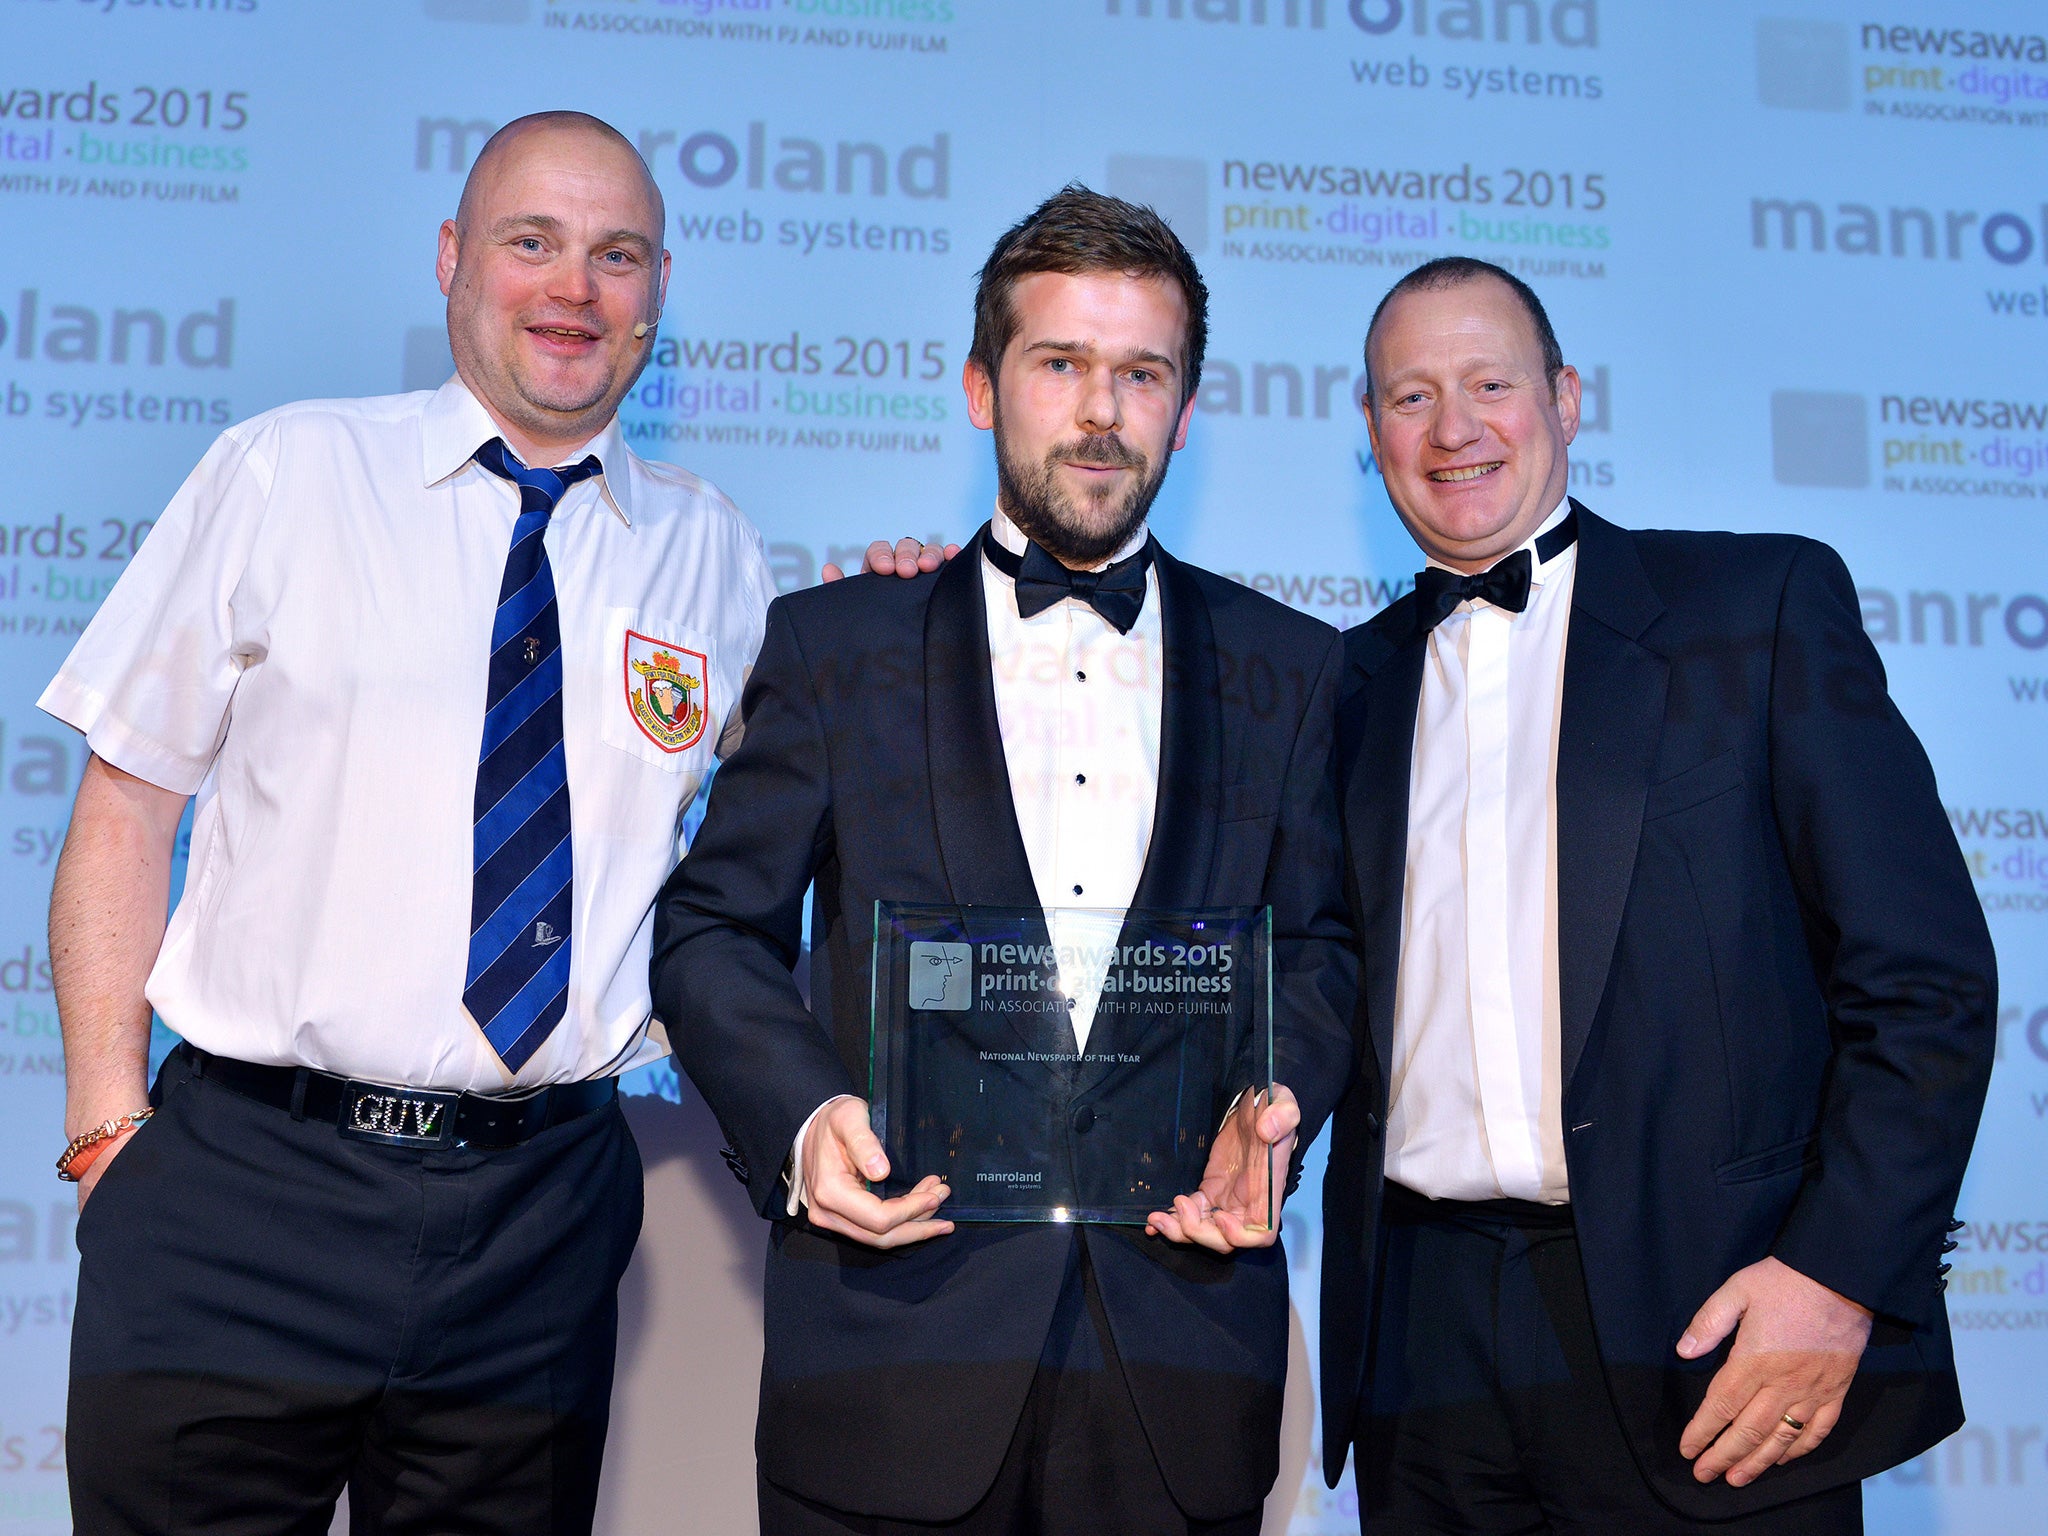 Oliver Duff, editor of i (centre), accepts the award for National Newspaper of the Year, alongside comedian Al Murray (L) and John Ellis, MD of manroland web systems (R)